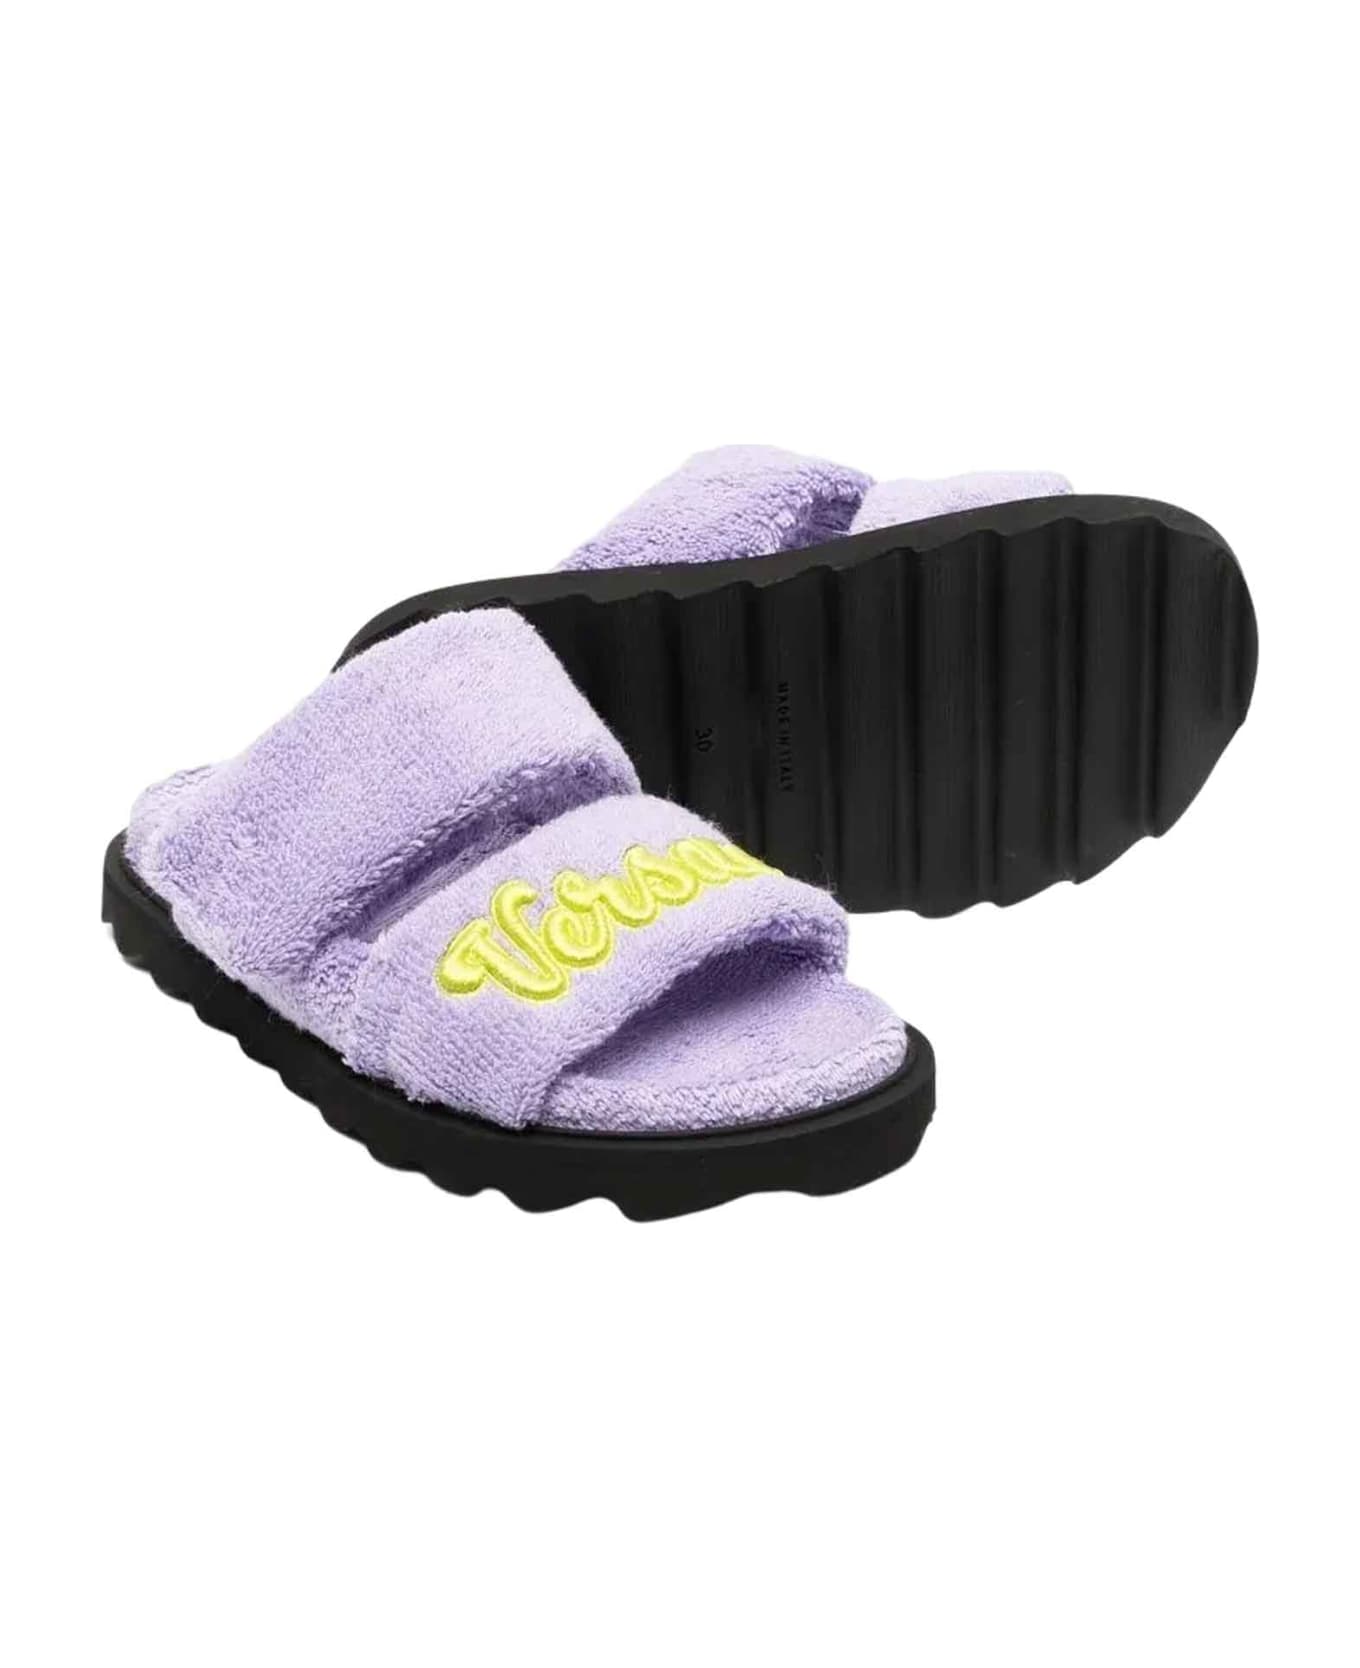 Young Versace Lilac/lime Sandals Unisex Kids - Baby Violet Acid Lime シューズ